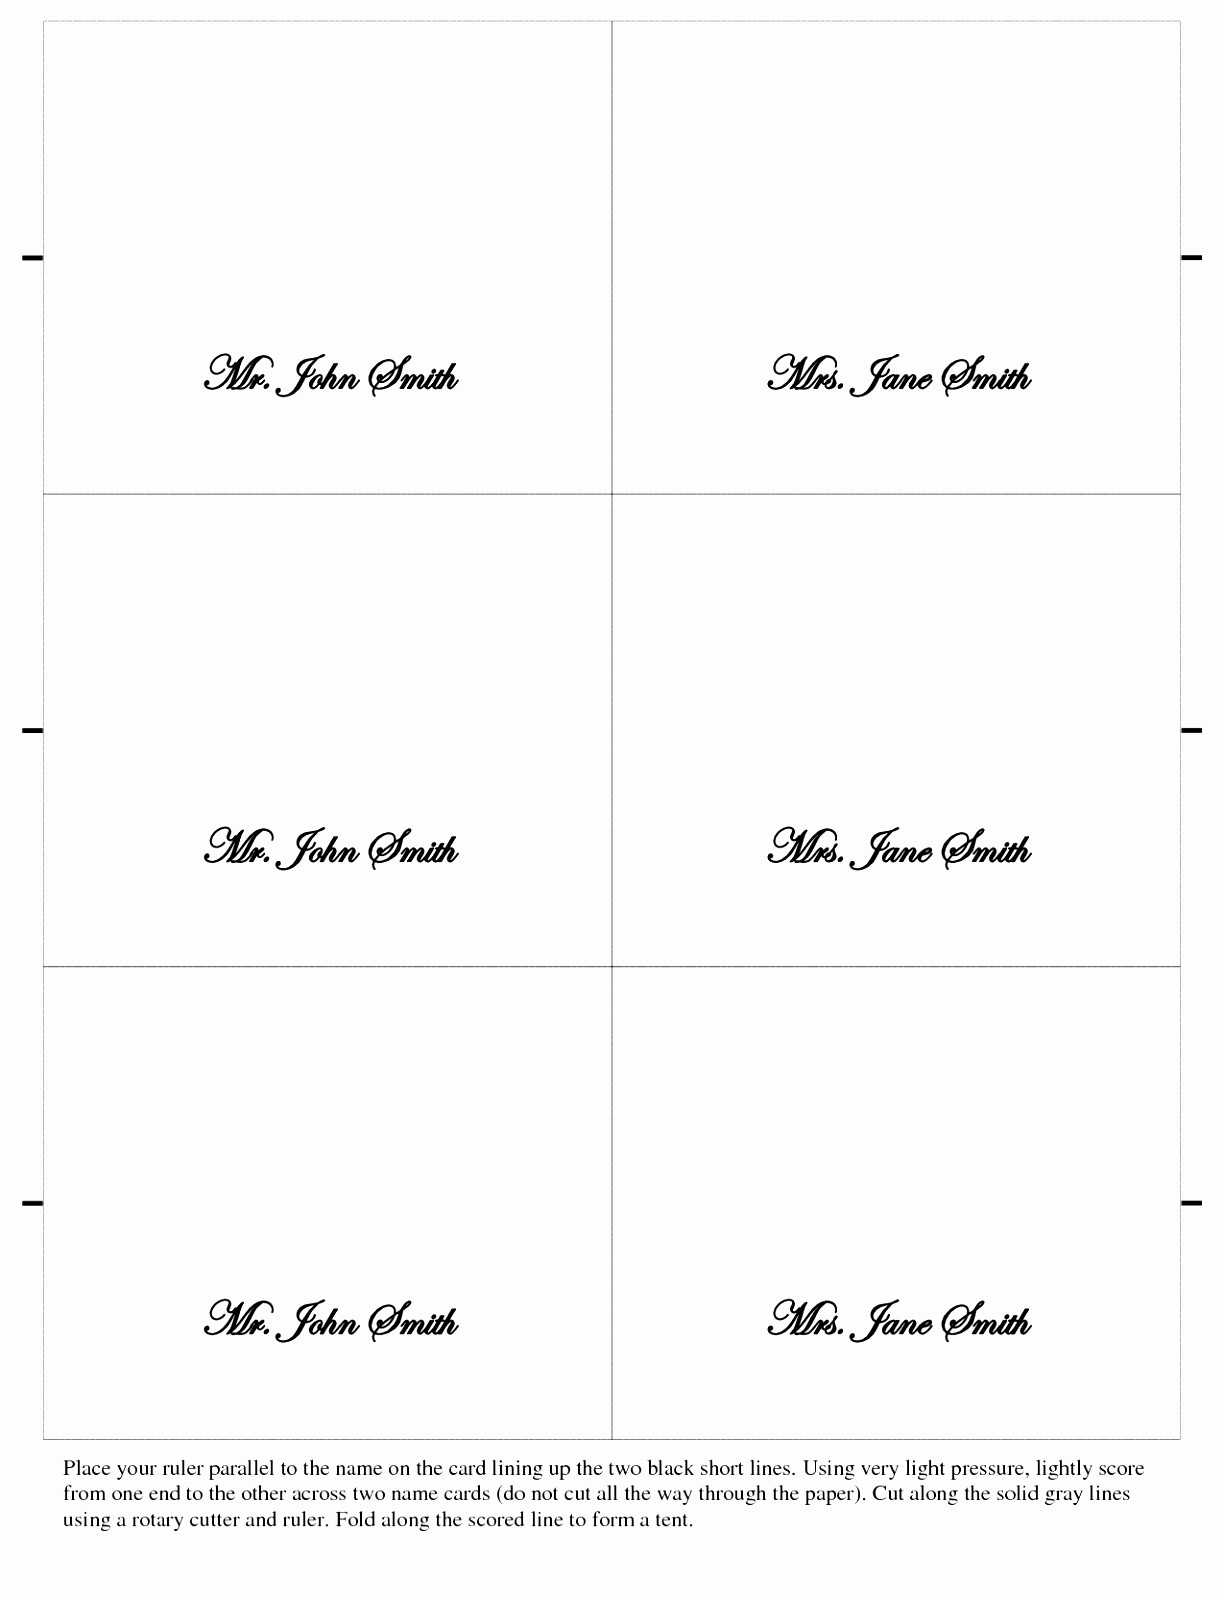 Place Card Template Per Eet Landing Page Small Tent In Free Template For Place Cards 6 Per Sheet